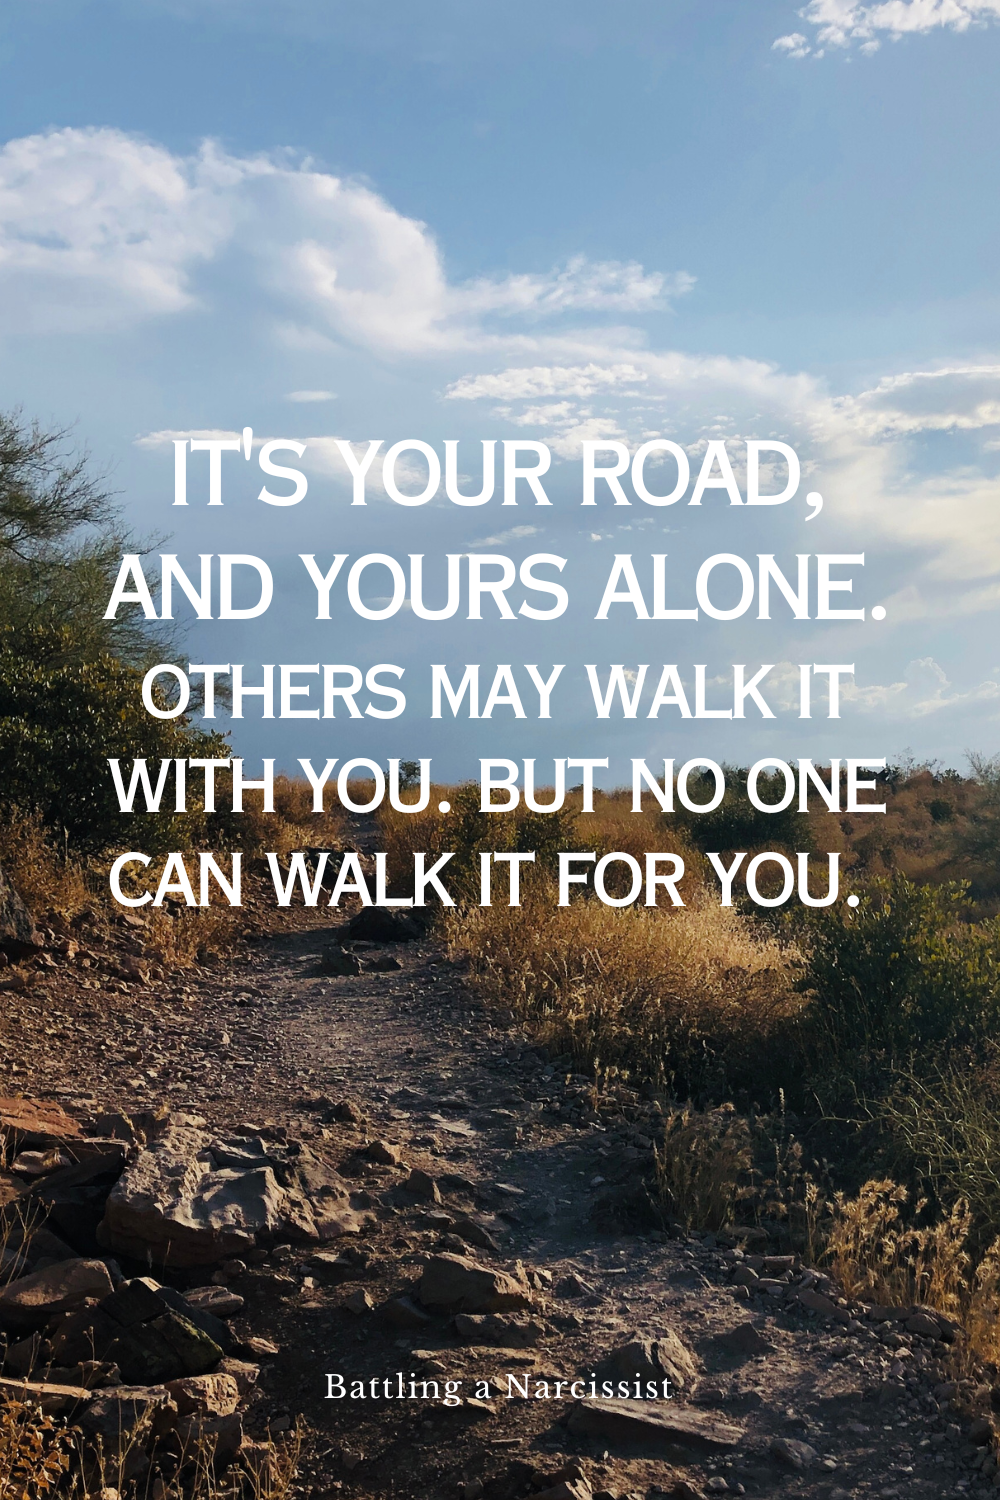 It's your road and yours alone. Others may walk it with you, but no-one can walk it for you.